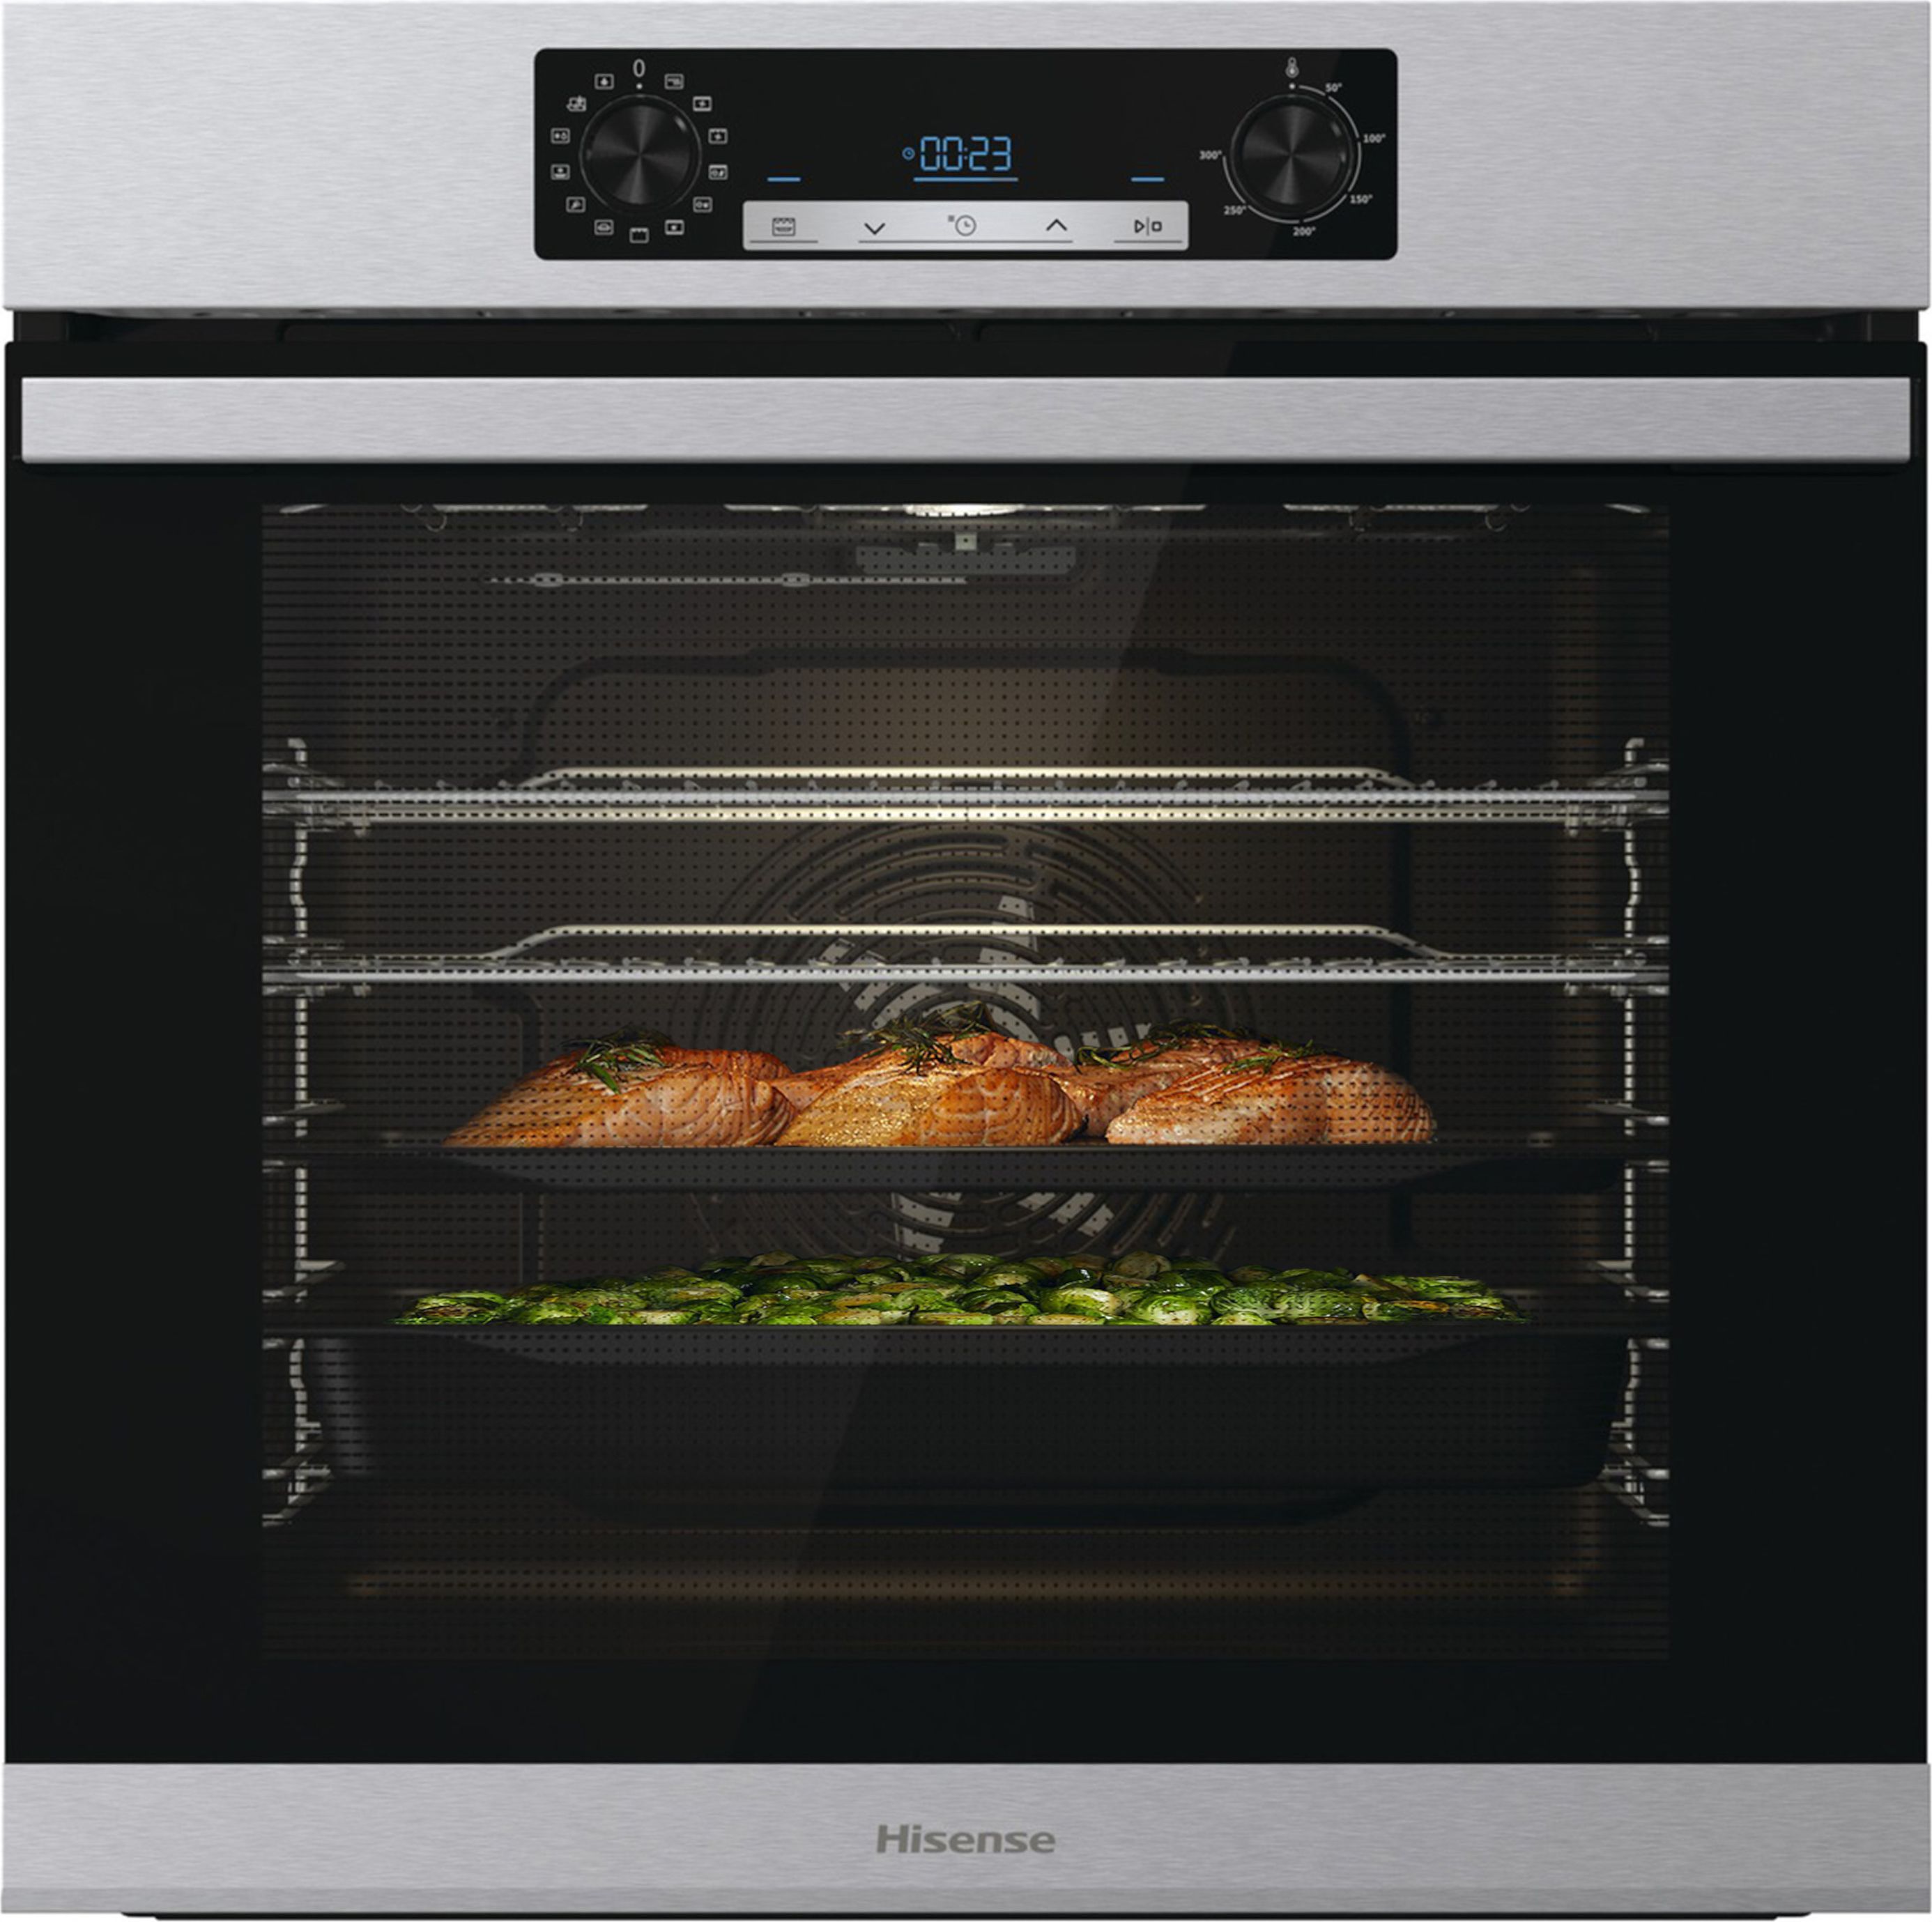 Hisense BSA65222AXUK Built In Electric Single Oven - Stainless Steel - A Rated, Stainless Steel